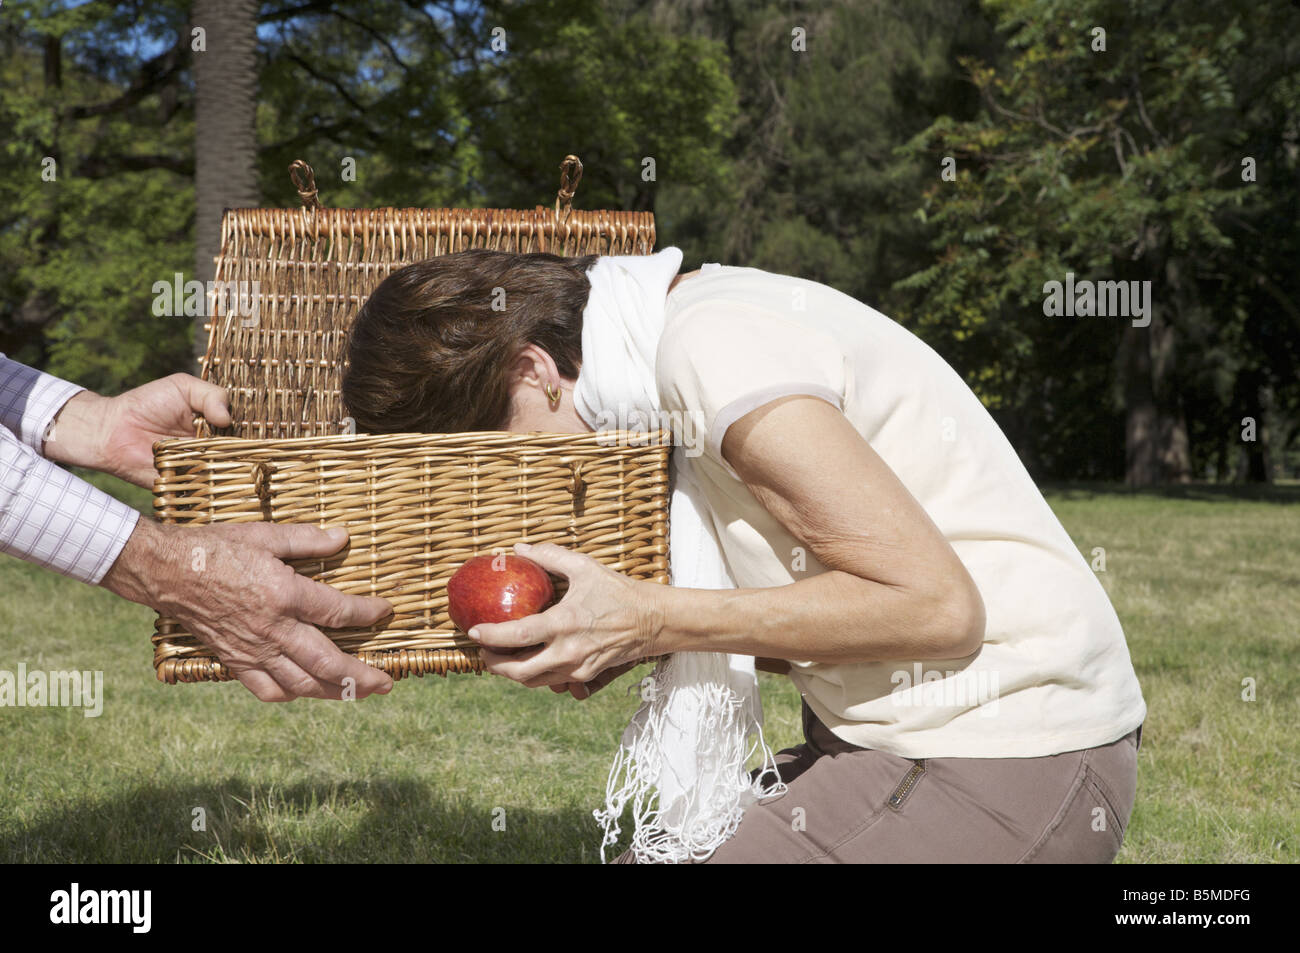 Woman vomiting into a picnic basket Stock Photo - Alamy